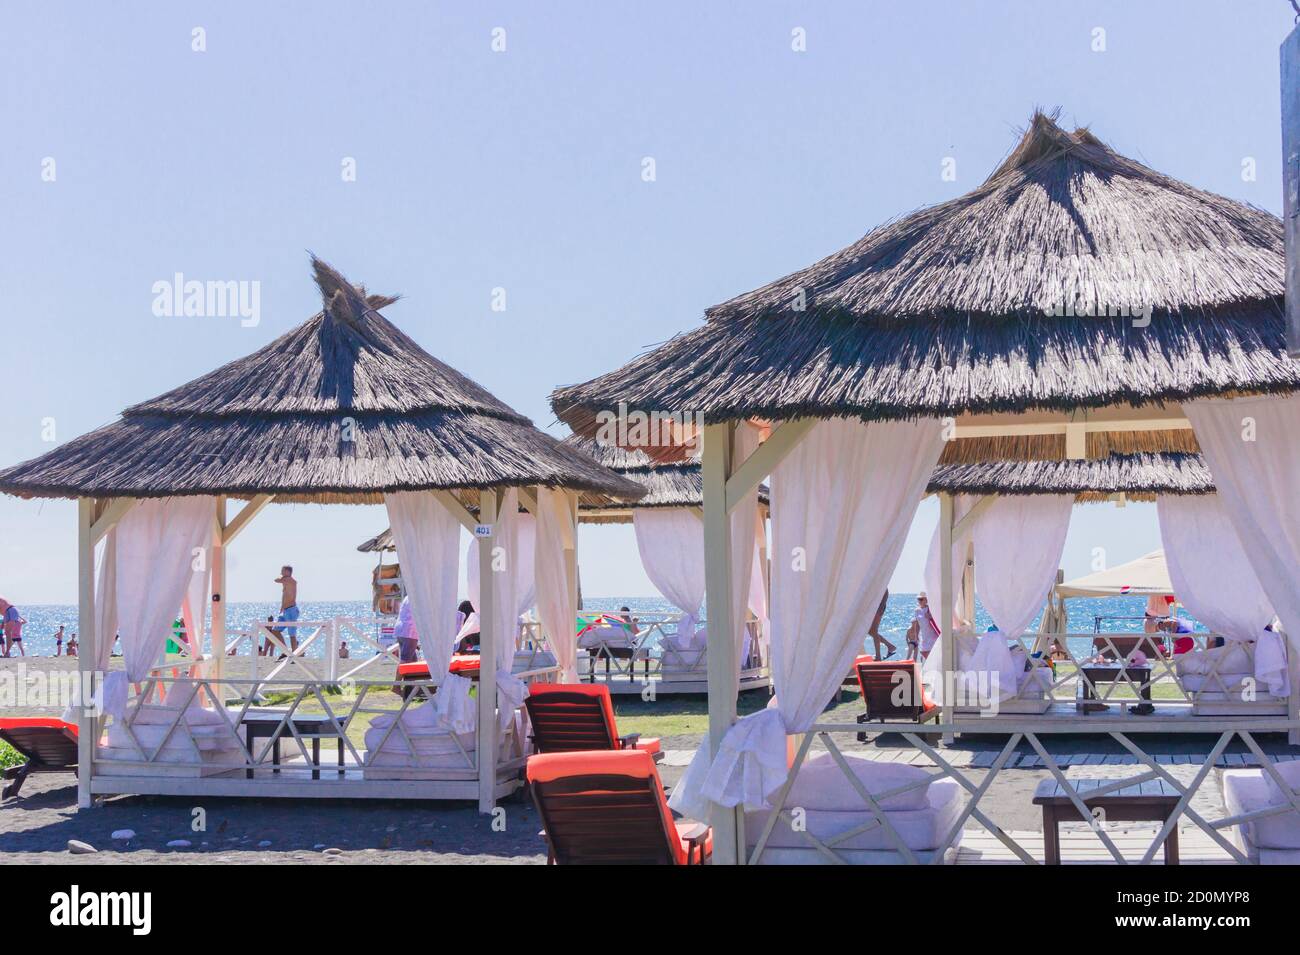 Sochi, Adler, Russia - September 07, 2019 - Plenty of Bungalows on a beach. Vacation resort concept Stock Photo